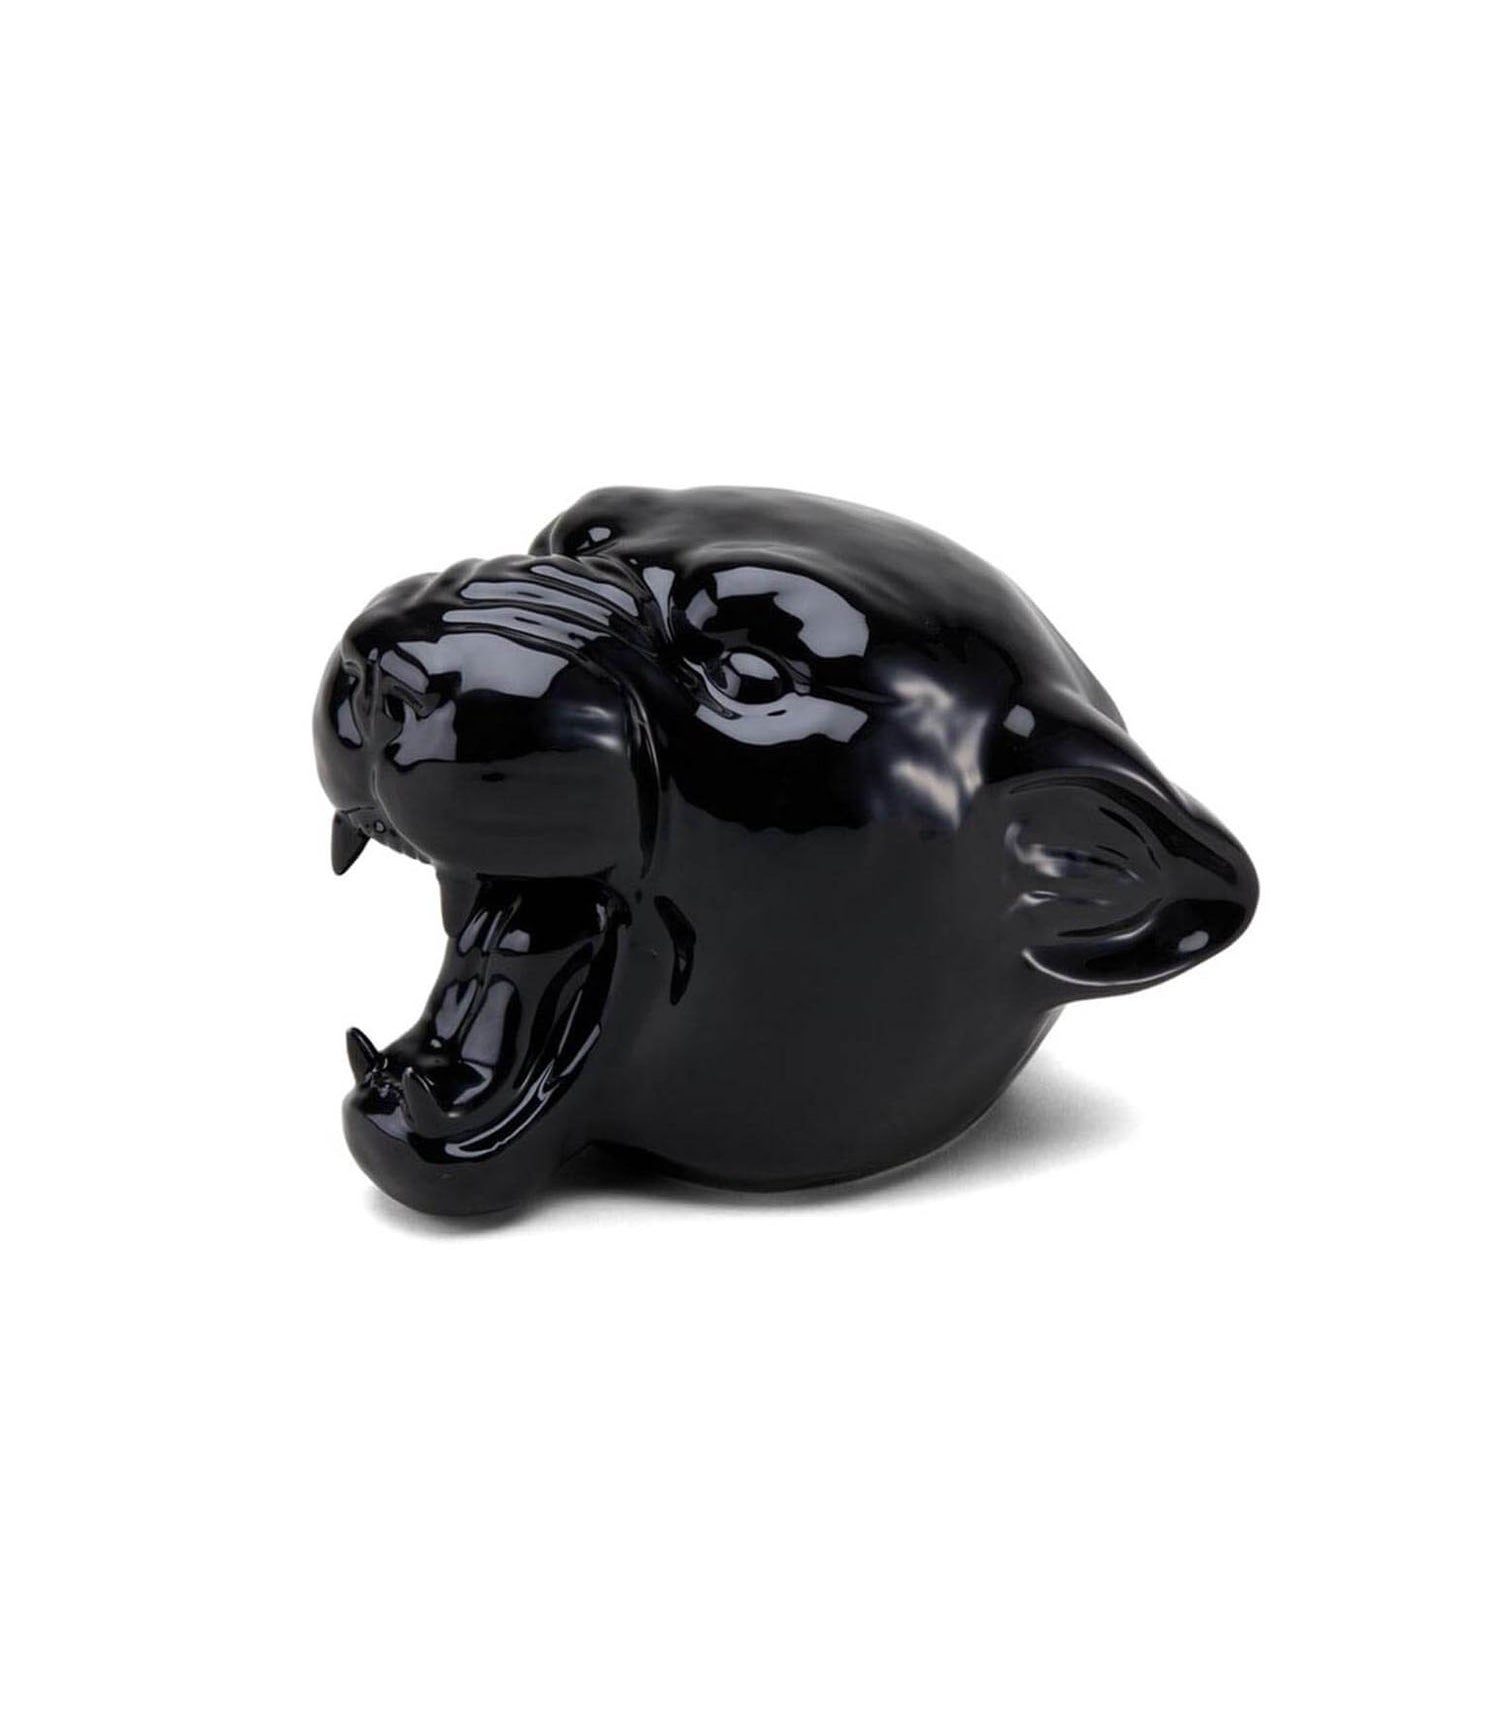 Panther Incense Chamber - Black